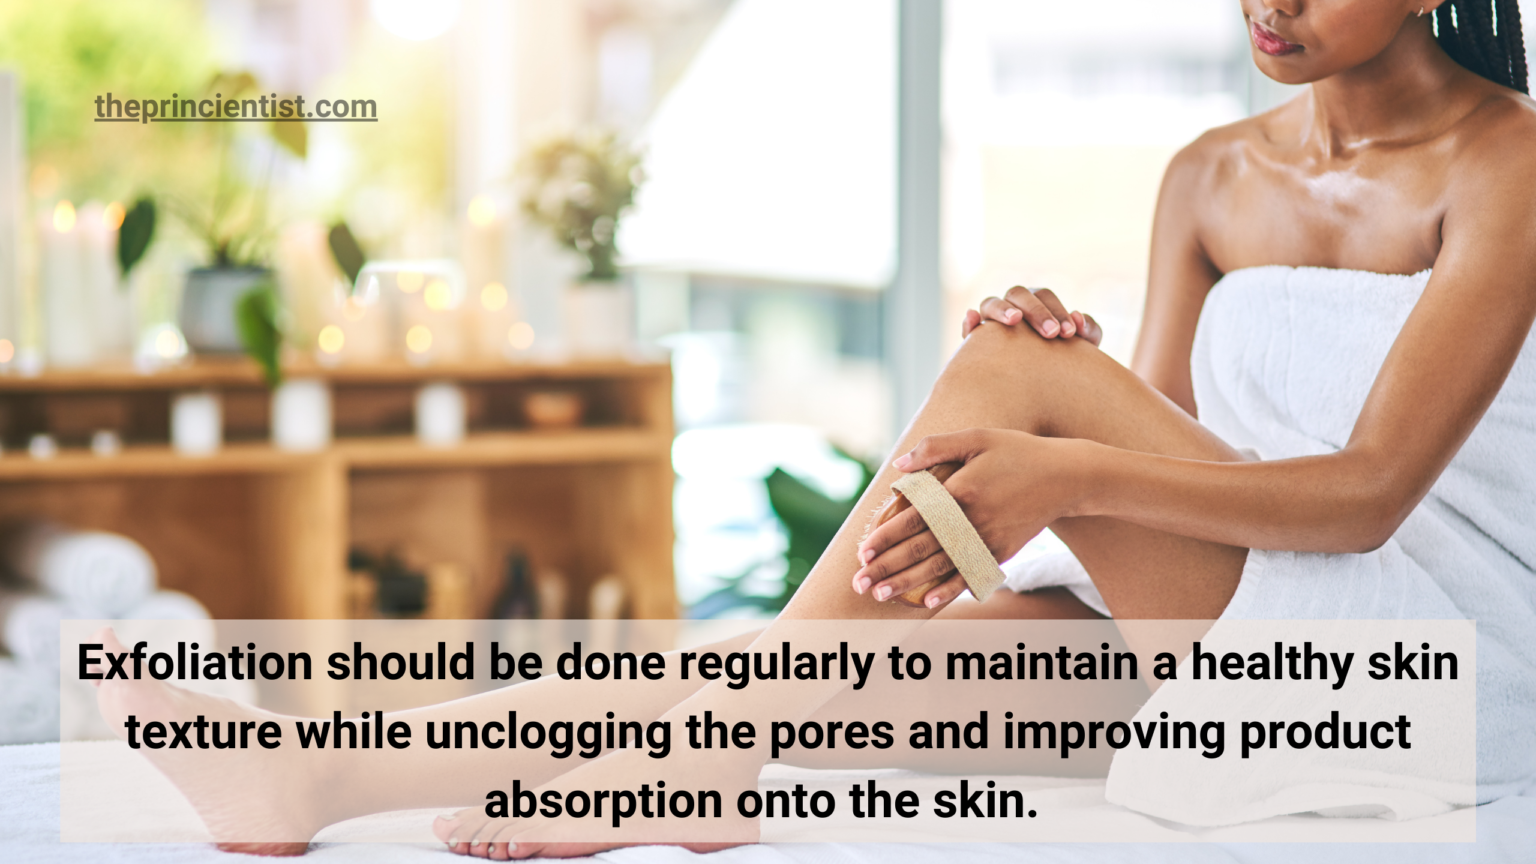 how to care for skin - exfoliation benefits quote - black woman is exfoliating her legs